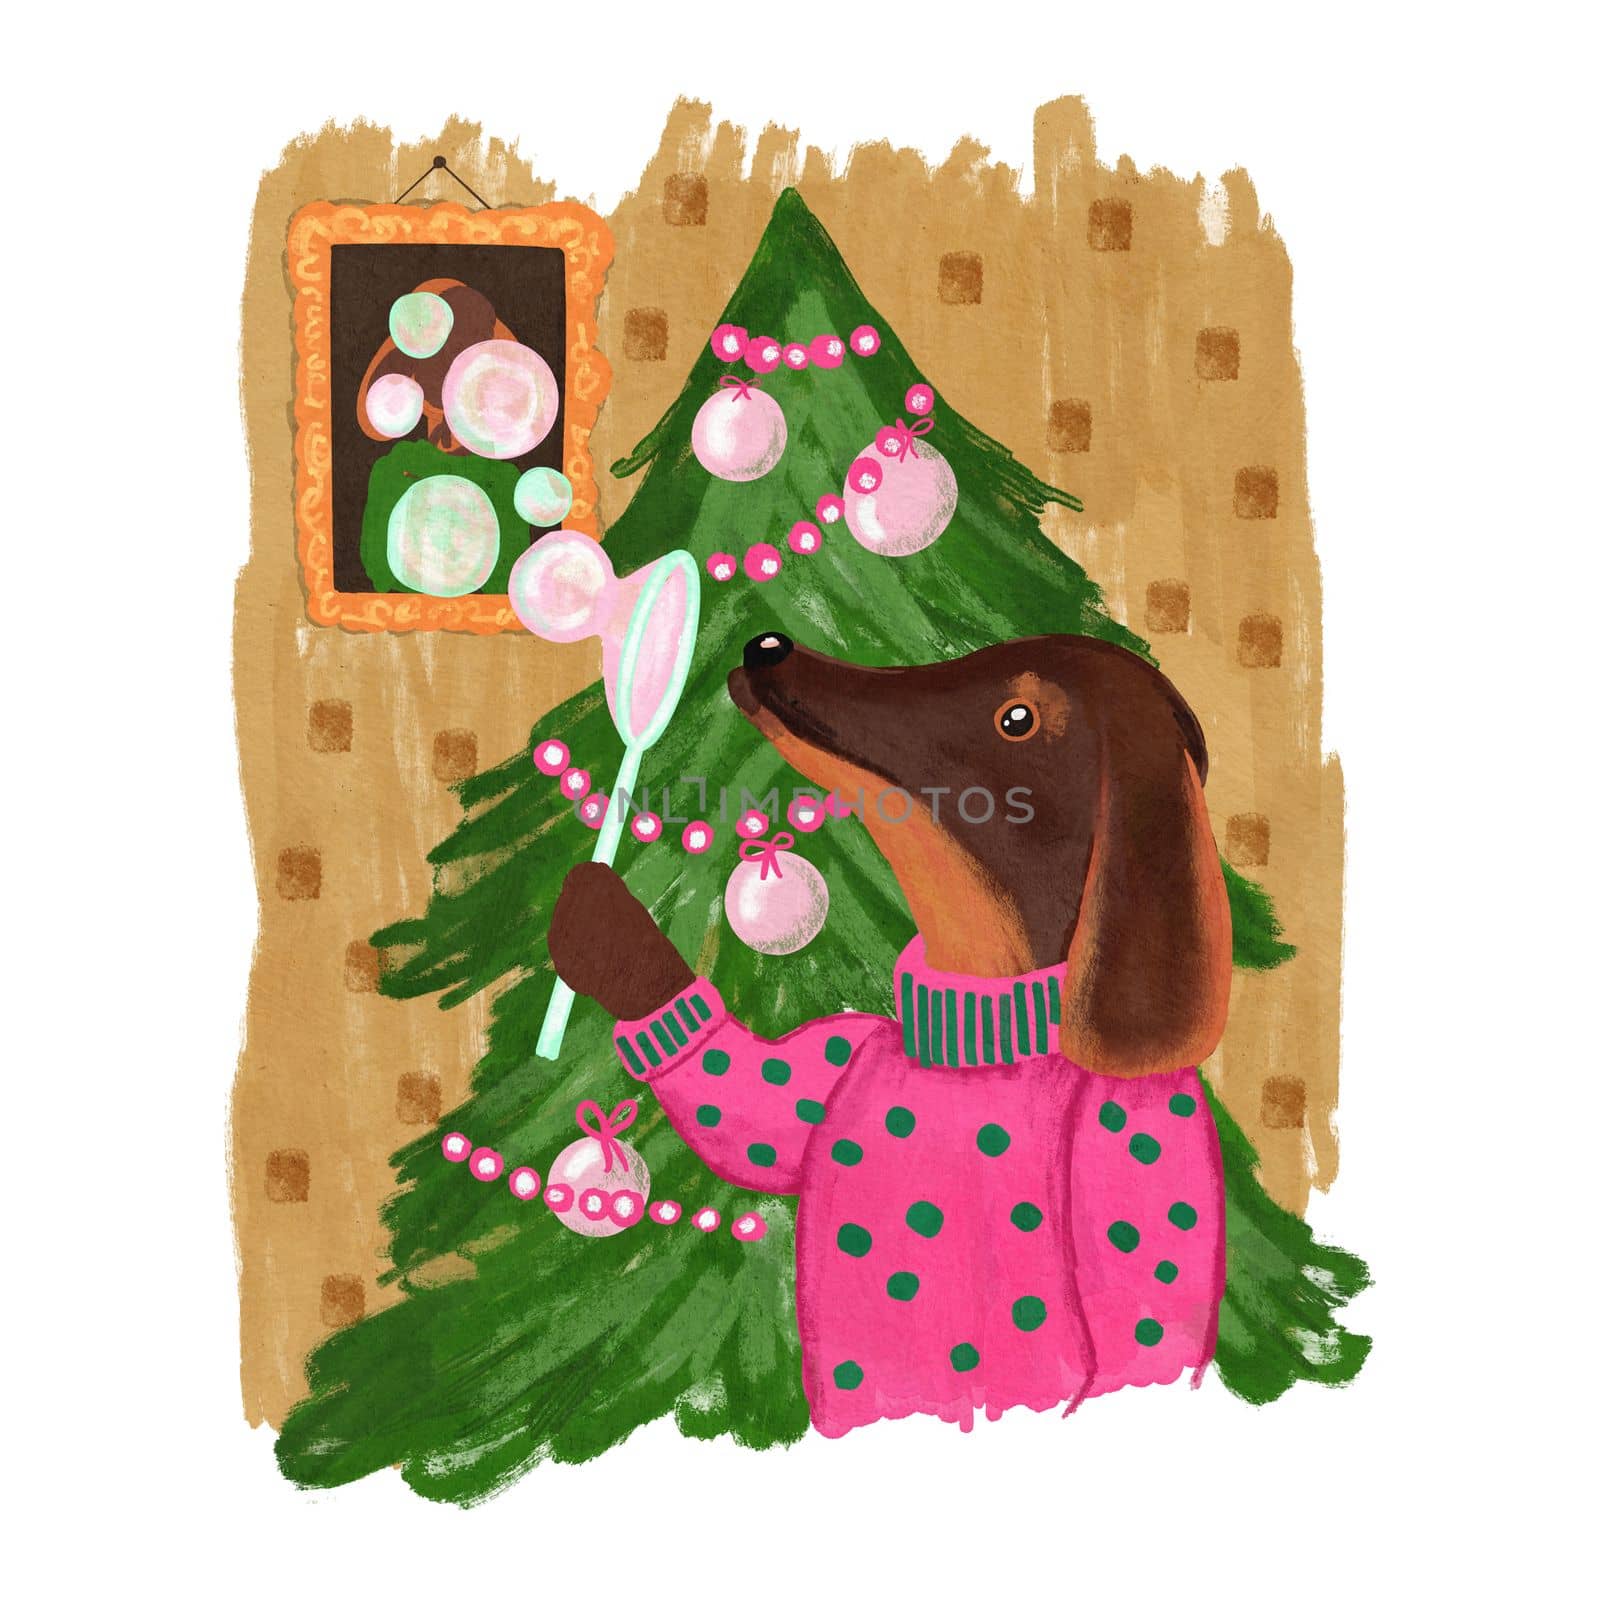 Hand drawn illustration of dog dachshund in pink sweater near christmas tree in home room interior. Cute character winter design for poster invitation card, funny print for children kids merry december decorative art